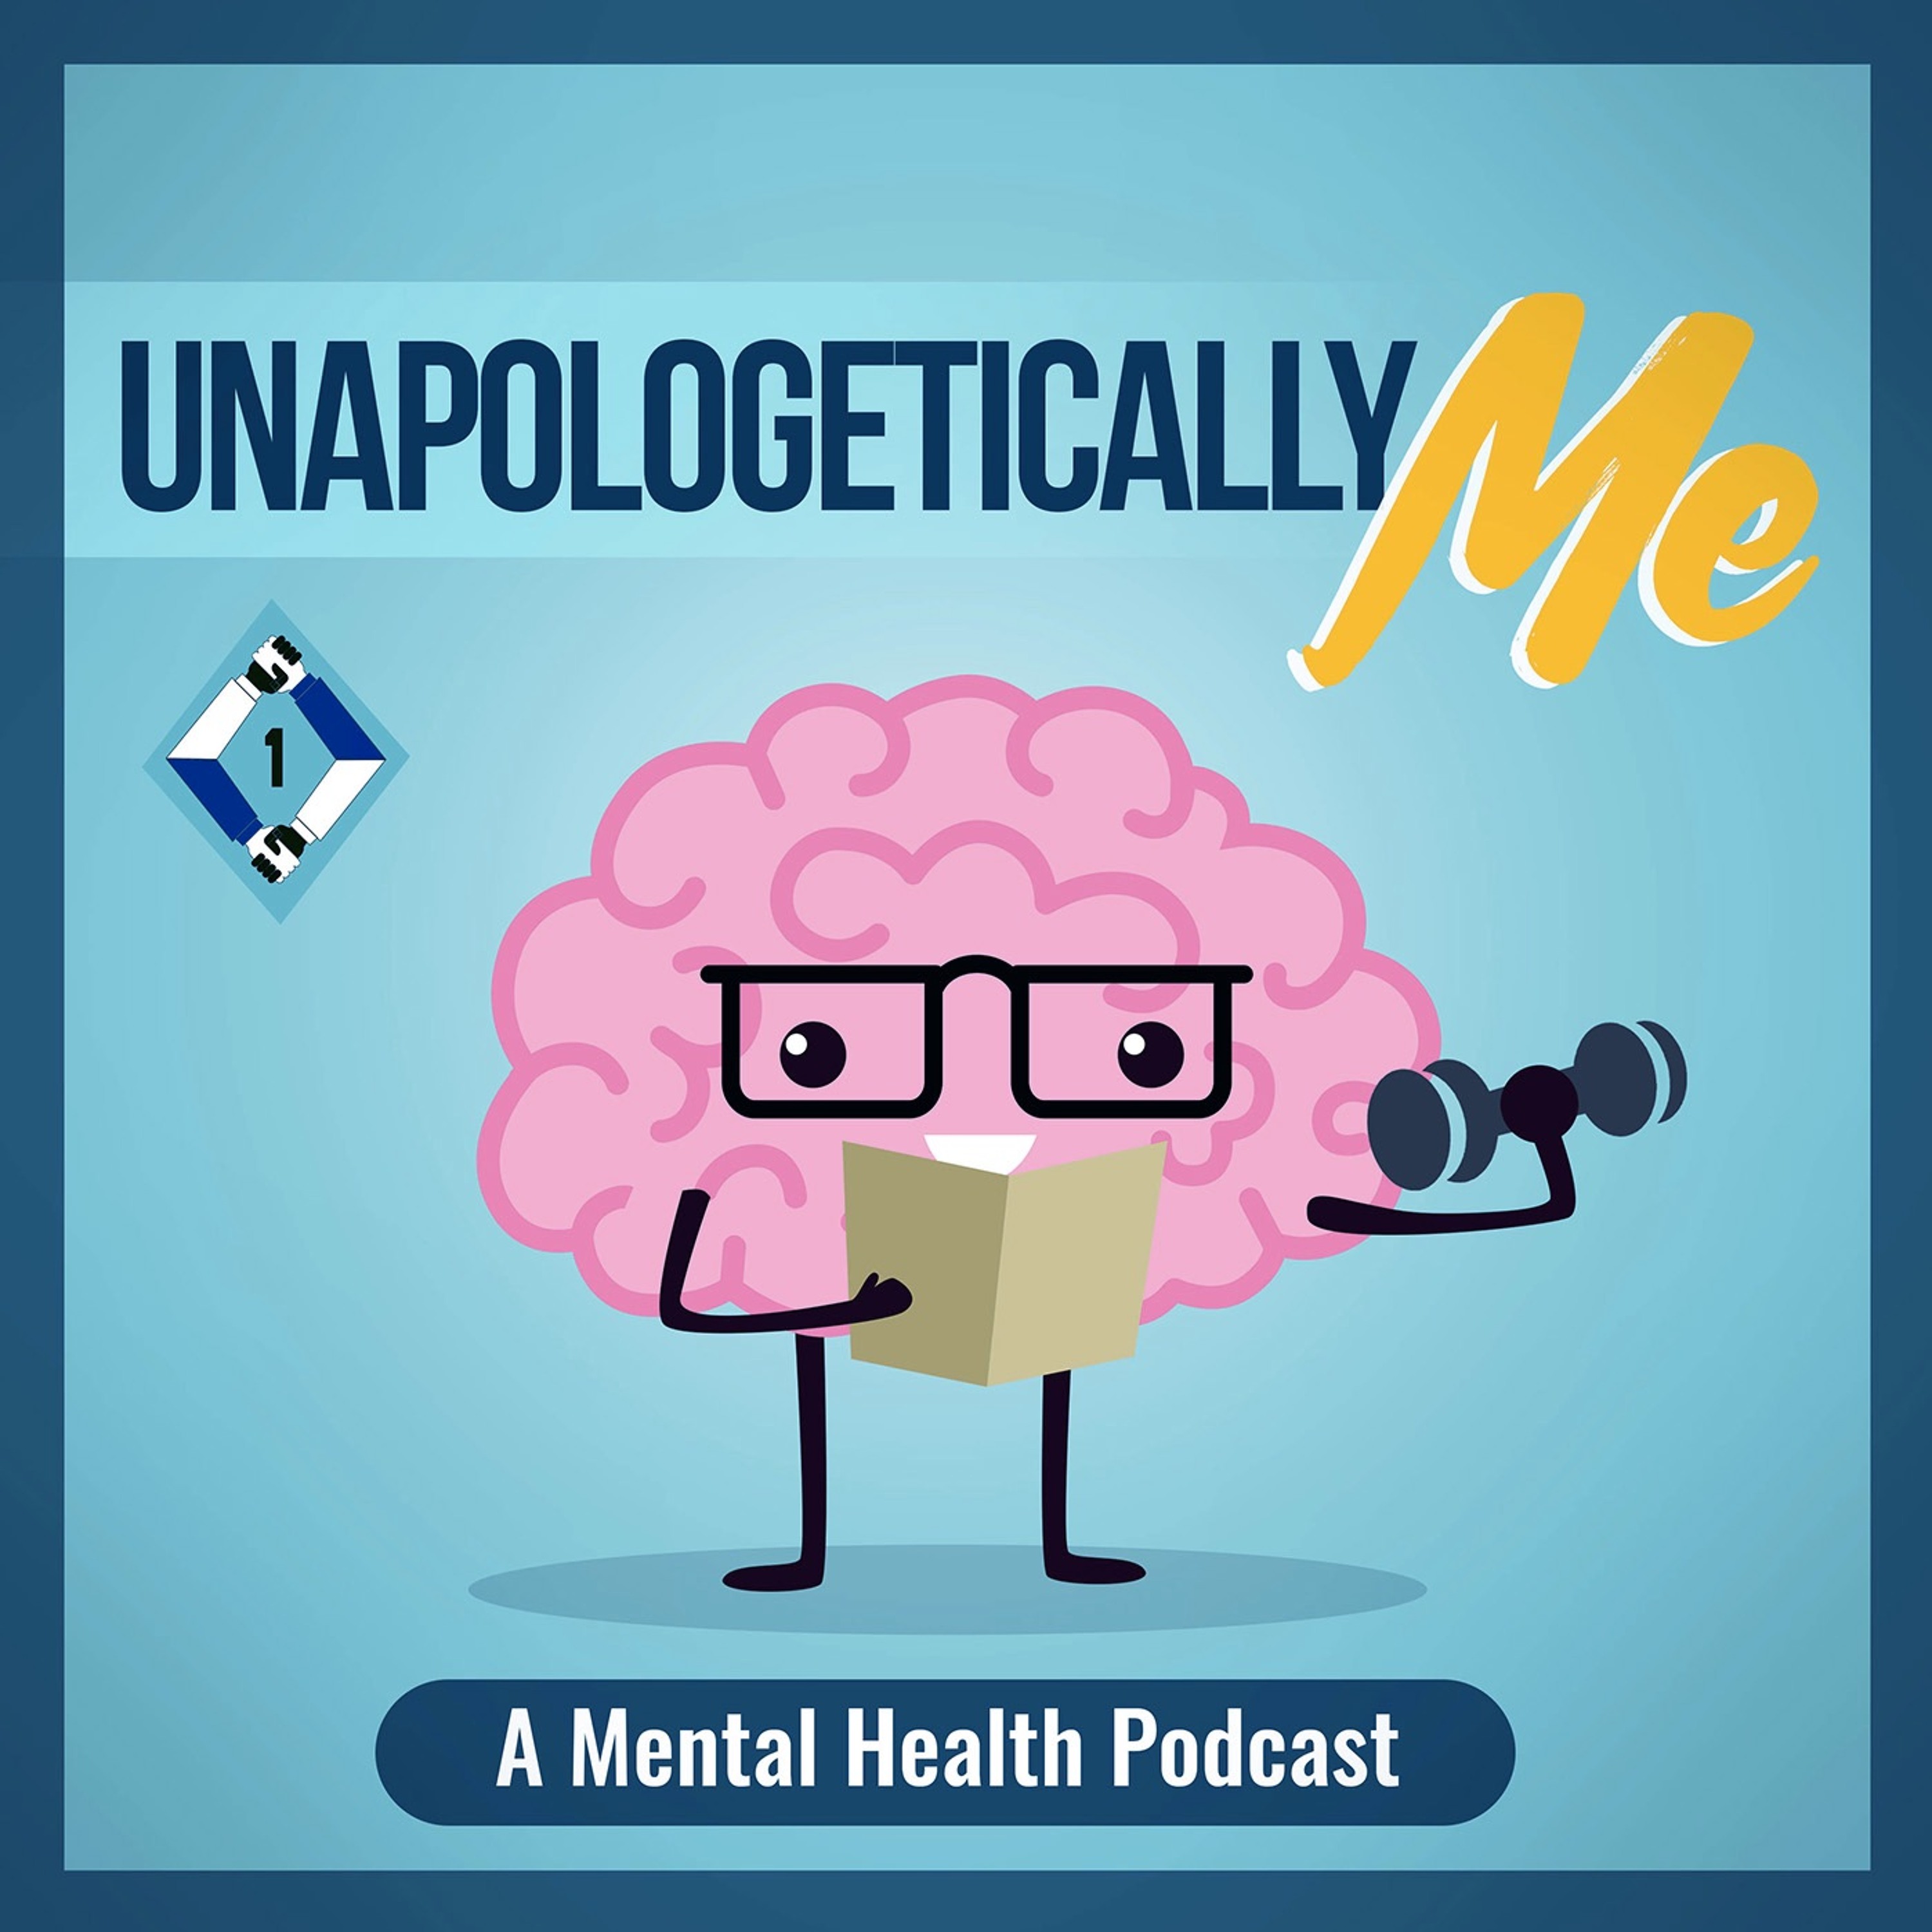 Unapologetically Me: A Mental Health Podcast - Negative Vs Positive Mind